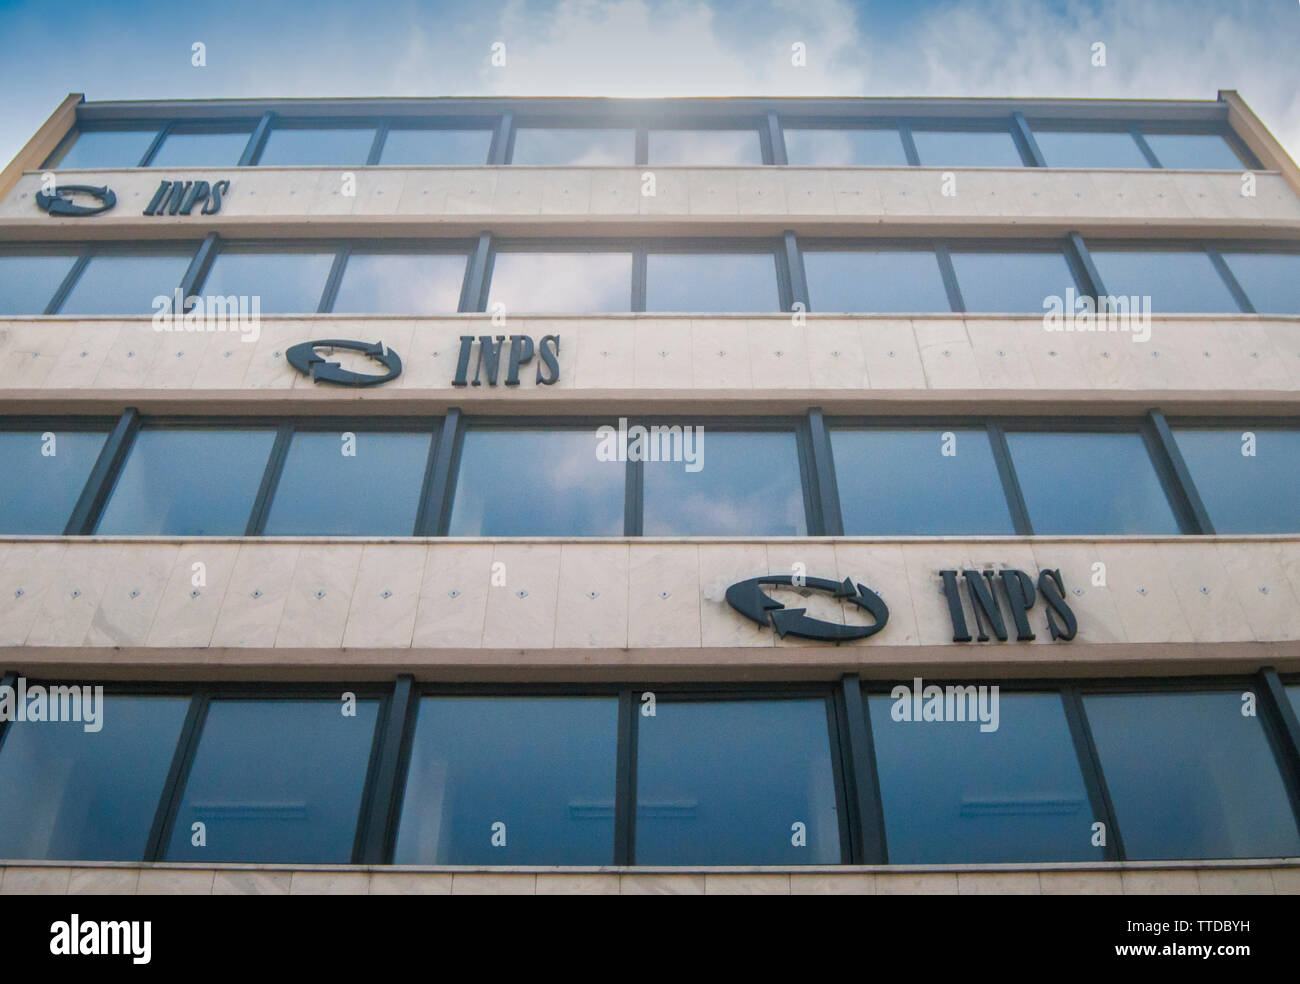 CARRARA, ITALY - JUNE 16, 2019: The building of the INPS headquarters, the national social security institute that deals with providing pensions and c Stock Photo